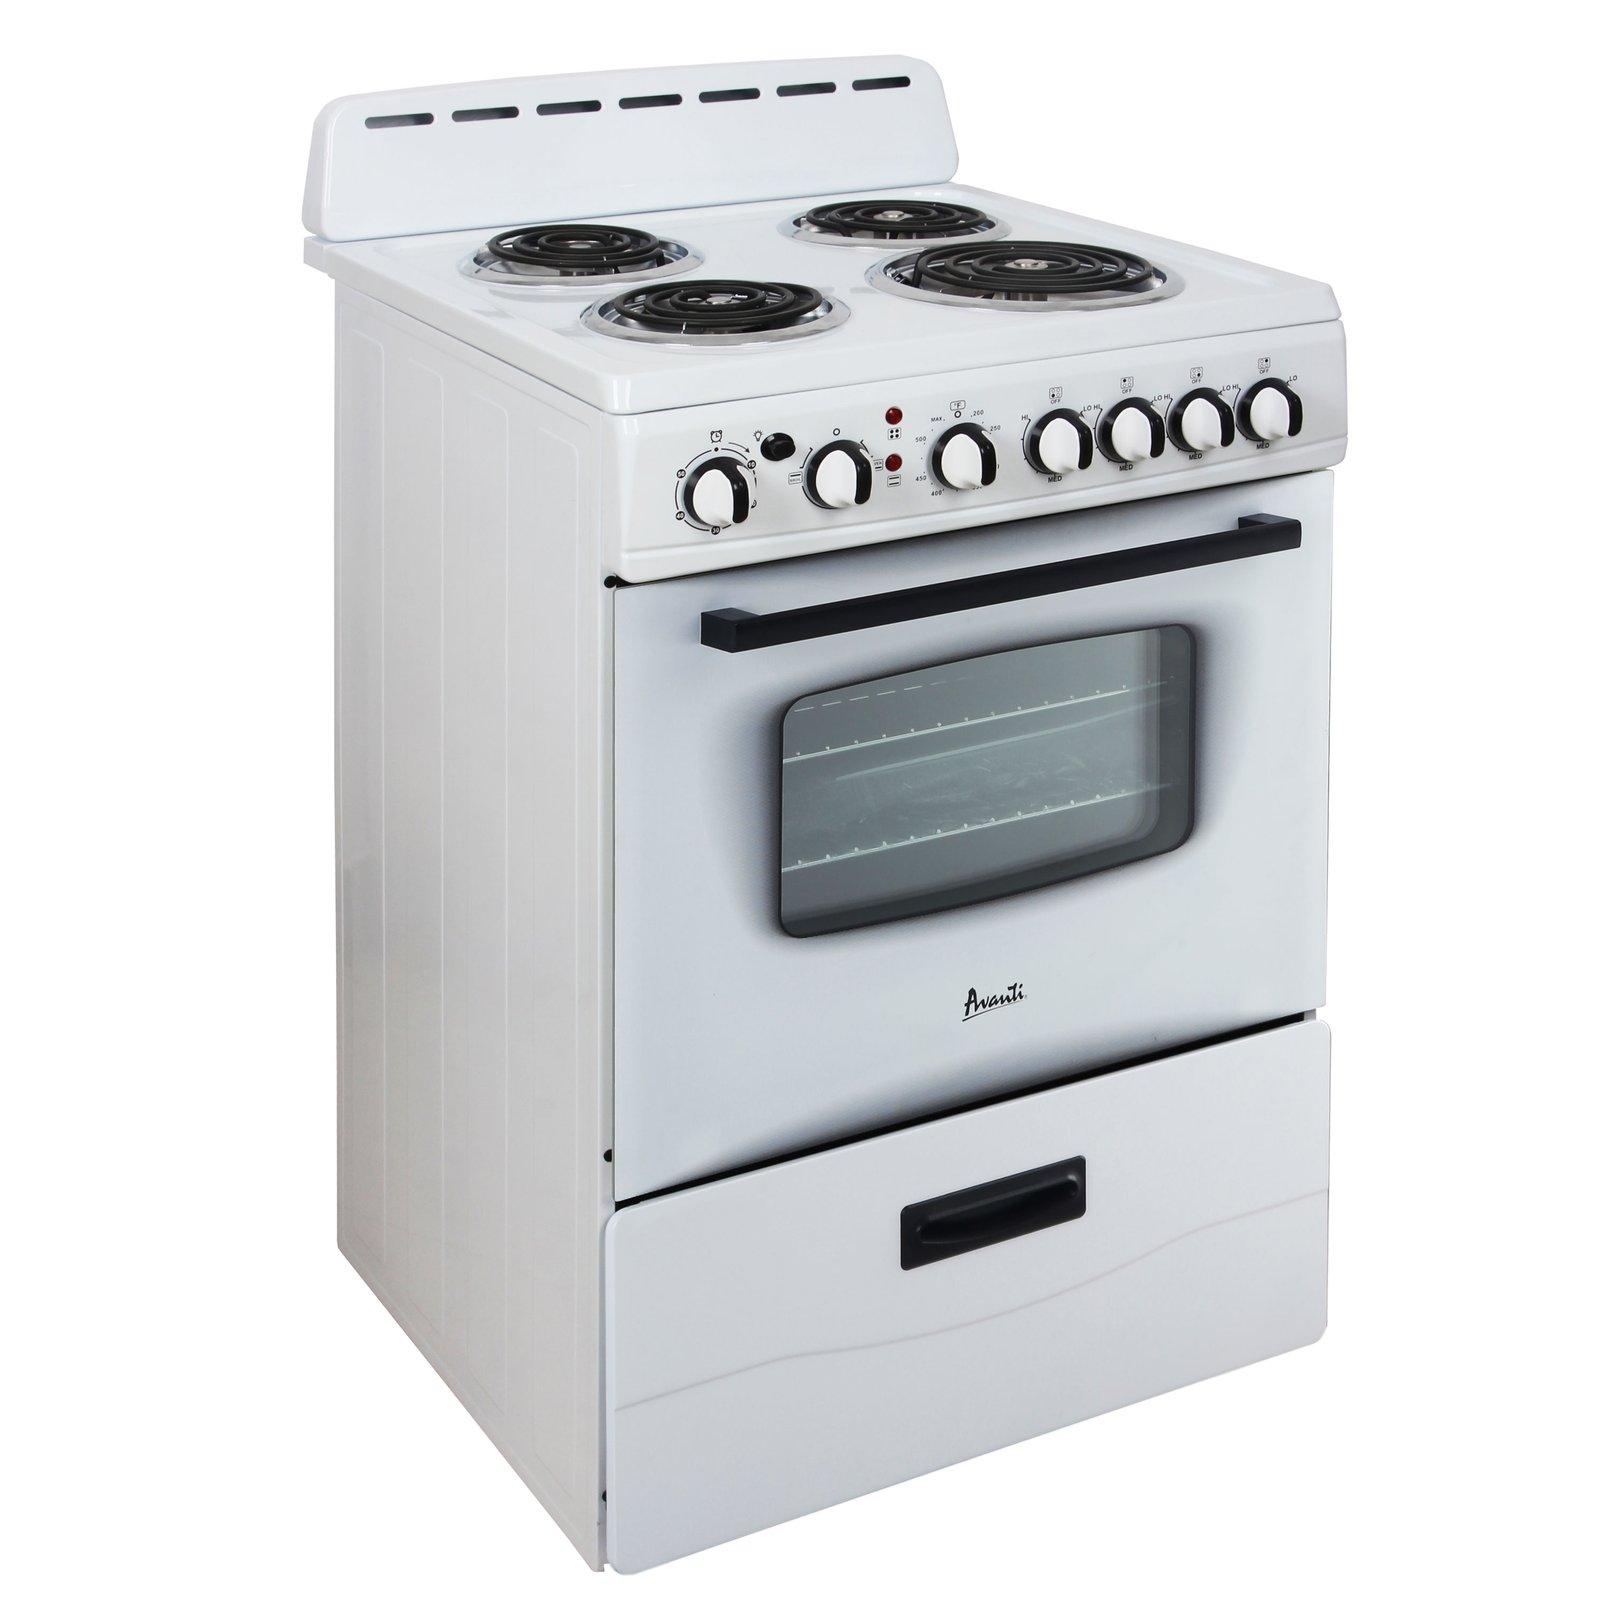 Avanti 24" Electric Range Oven with Framed Glass Door - Stainless Steel / 2.6 cu. ft.